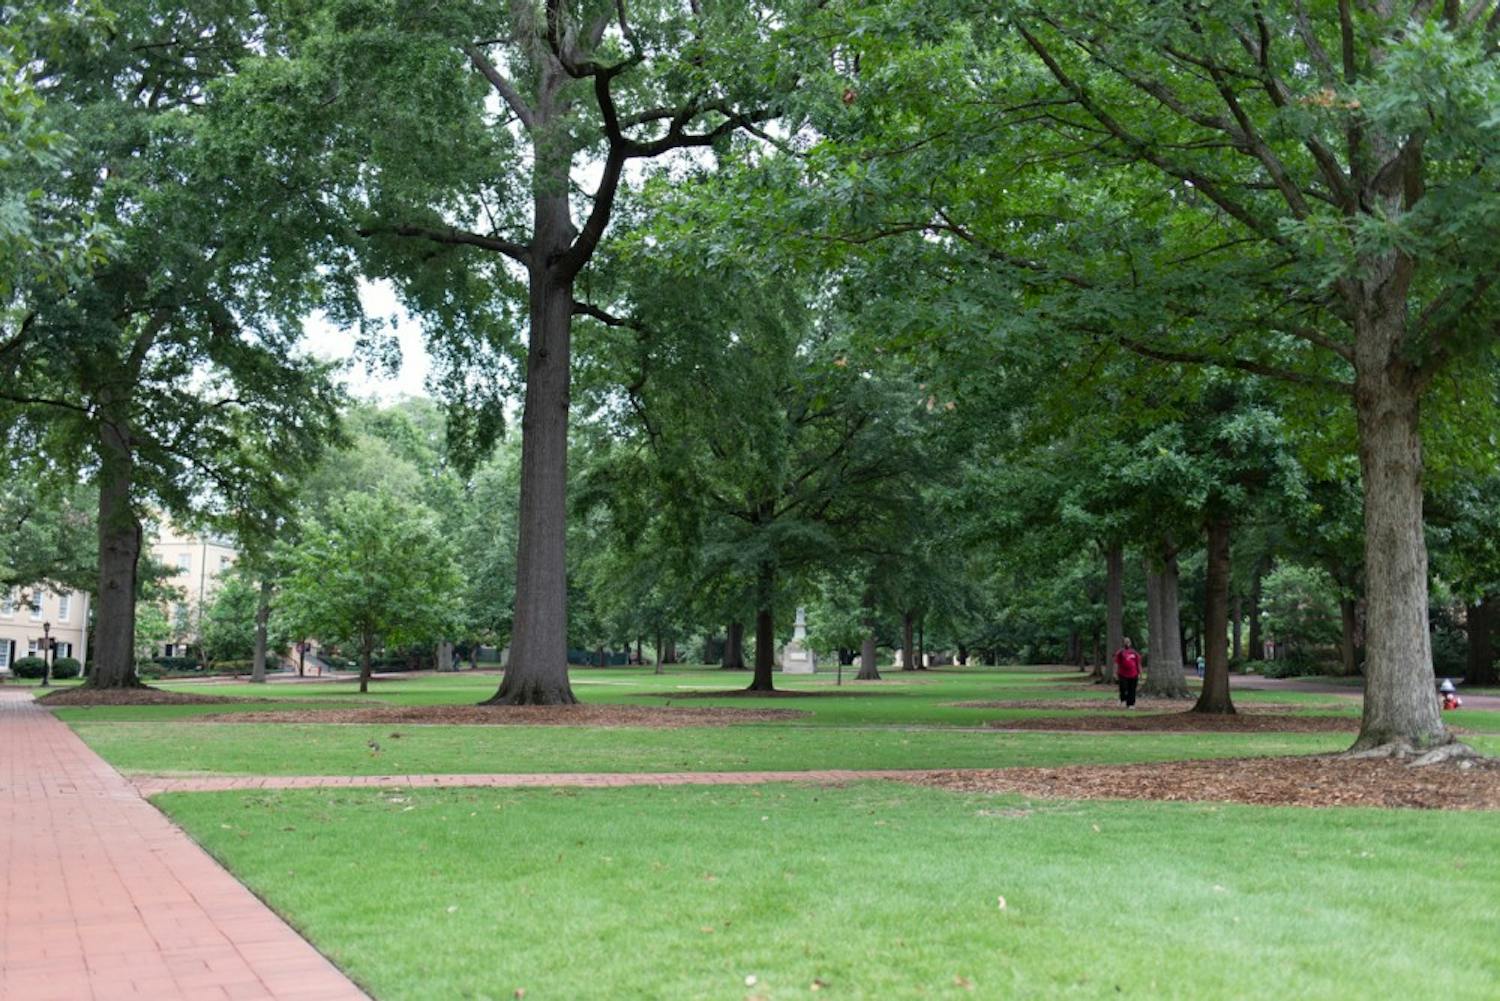 Pictures of Columbia and USC's campus throughout the summer of 2019 (an ongoing series.)